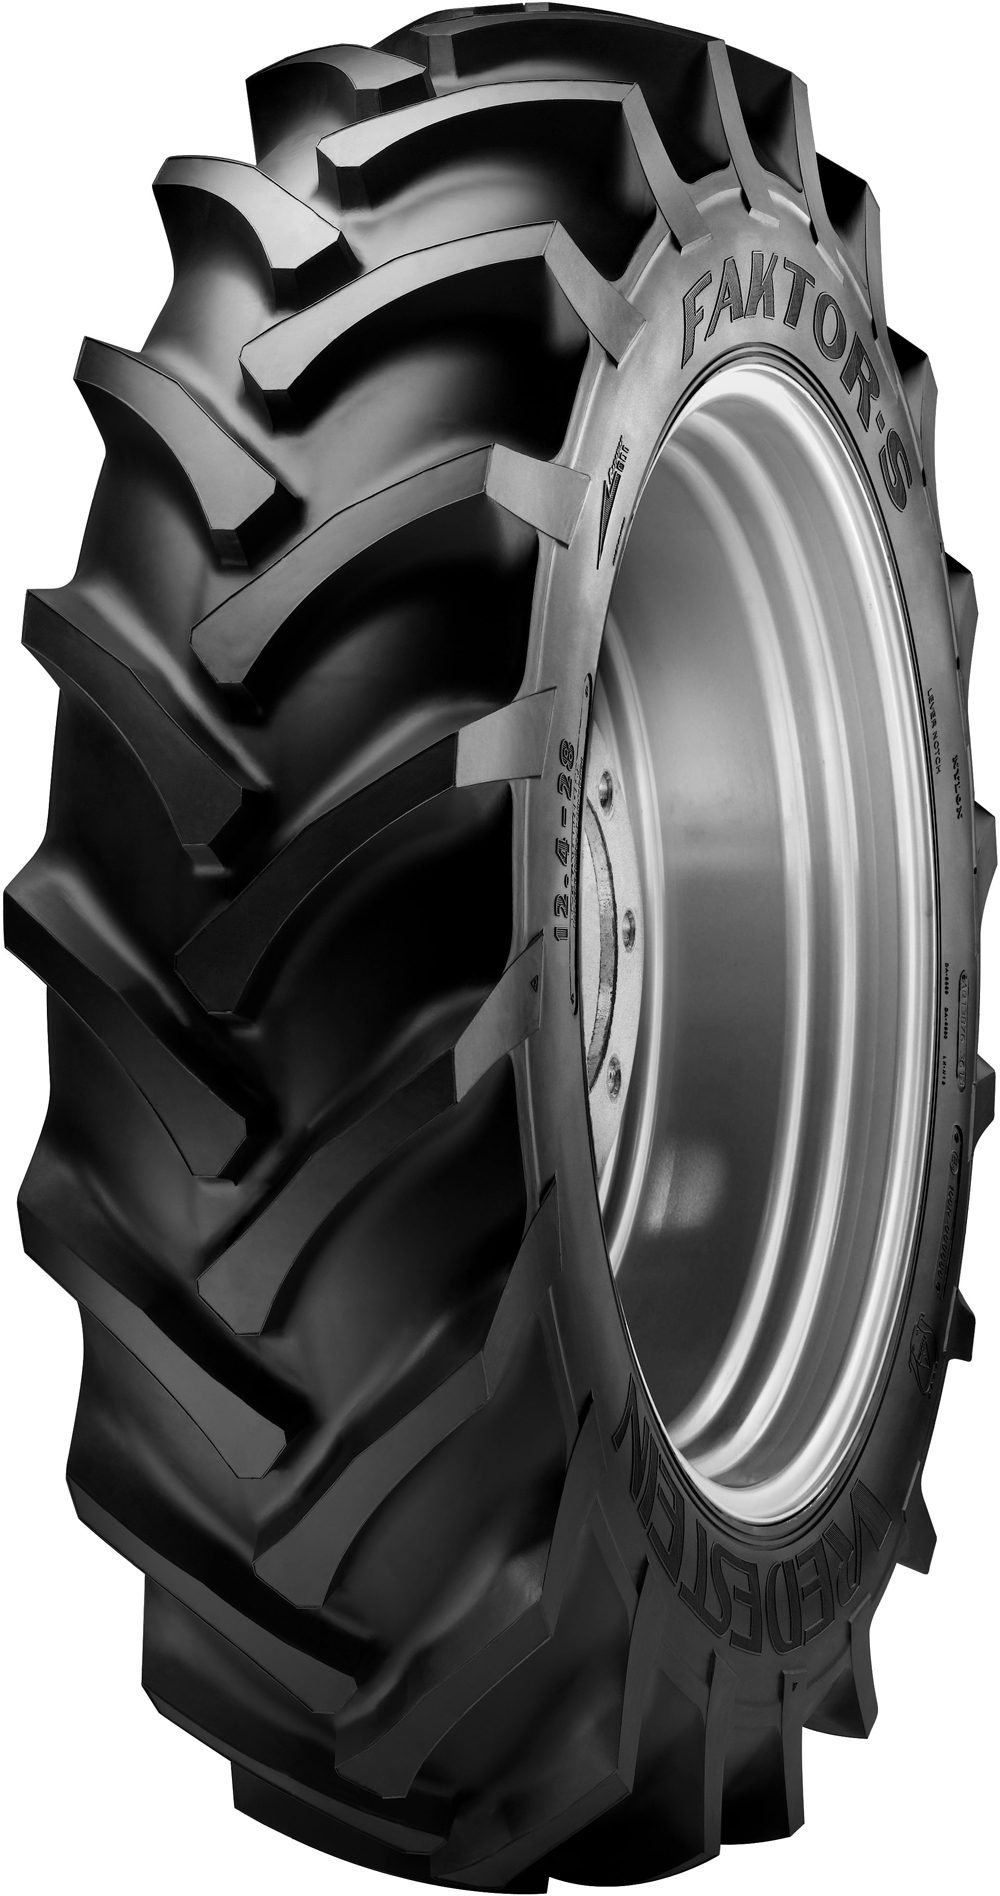 product_type-industrial_tires VREDESTEIN Faktor-S 8 TT 12.4 R28 123A8